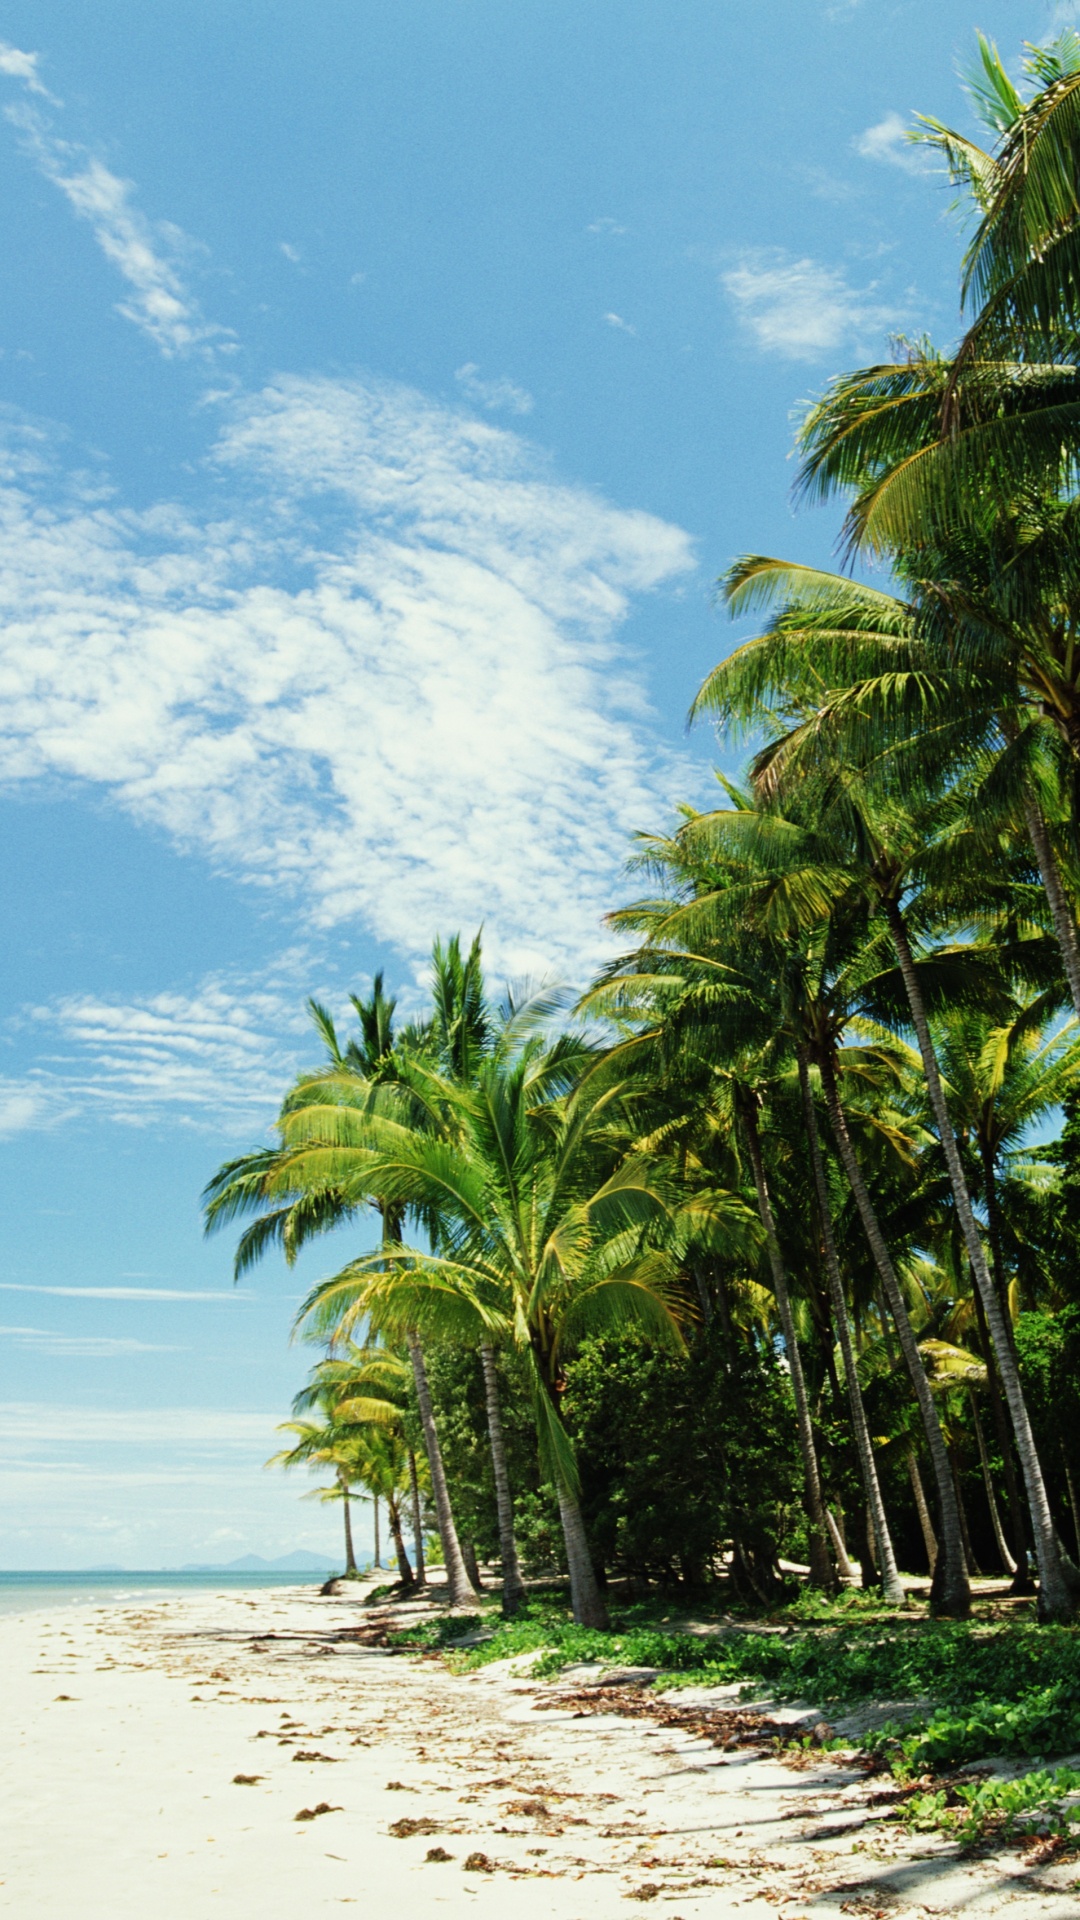 Green Palm Trees on White Sand Beach During Daytime. Wallpaper in 1080x1920 Resolution